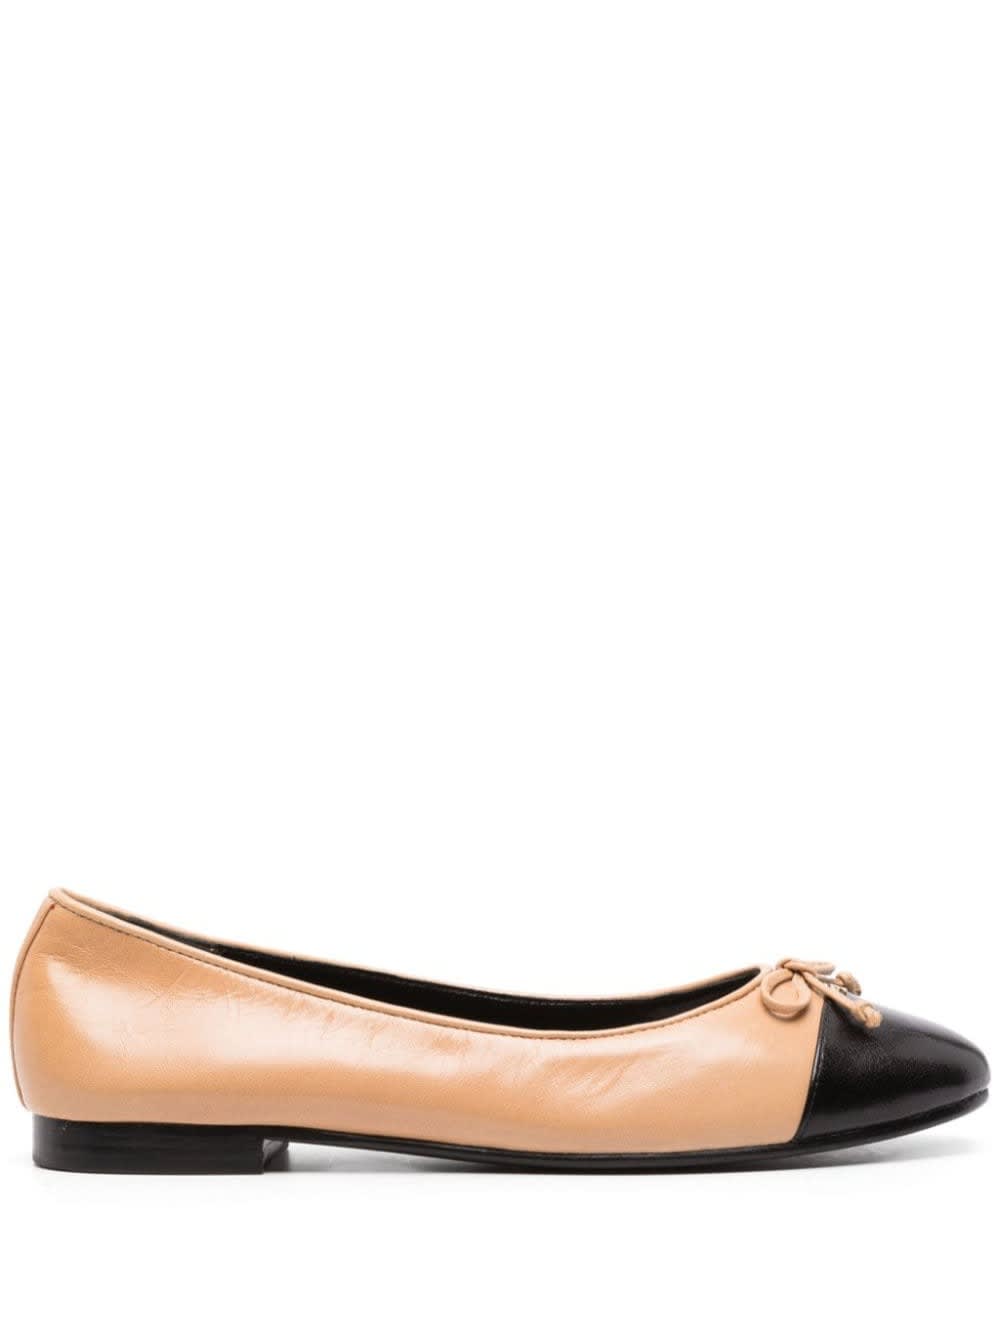 Tory Burch Beige Ballet Flats With Bow Detail And Contrasting Toe In Leather Woman